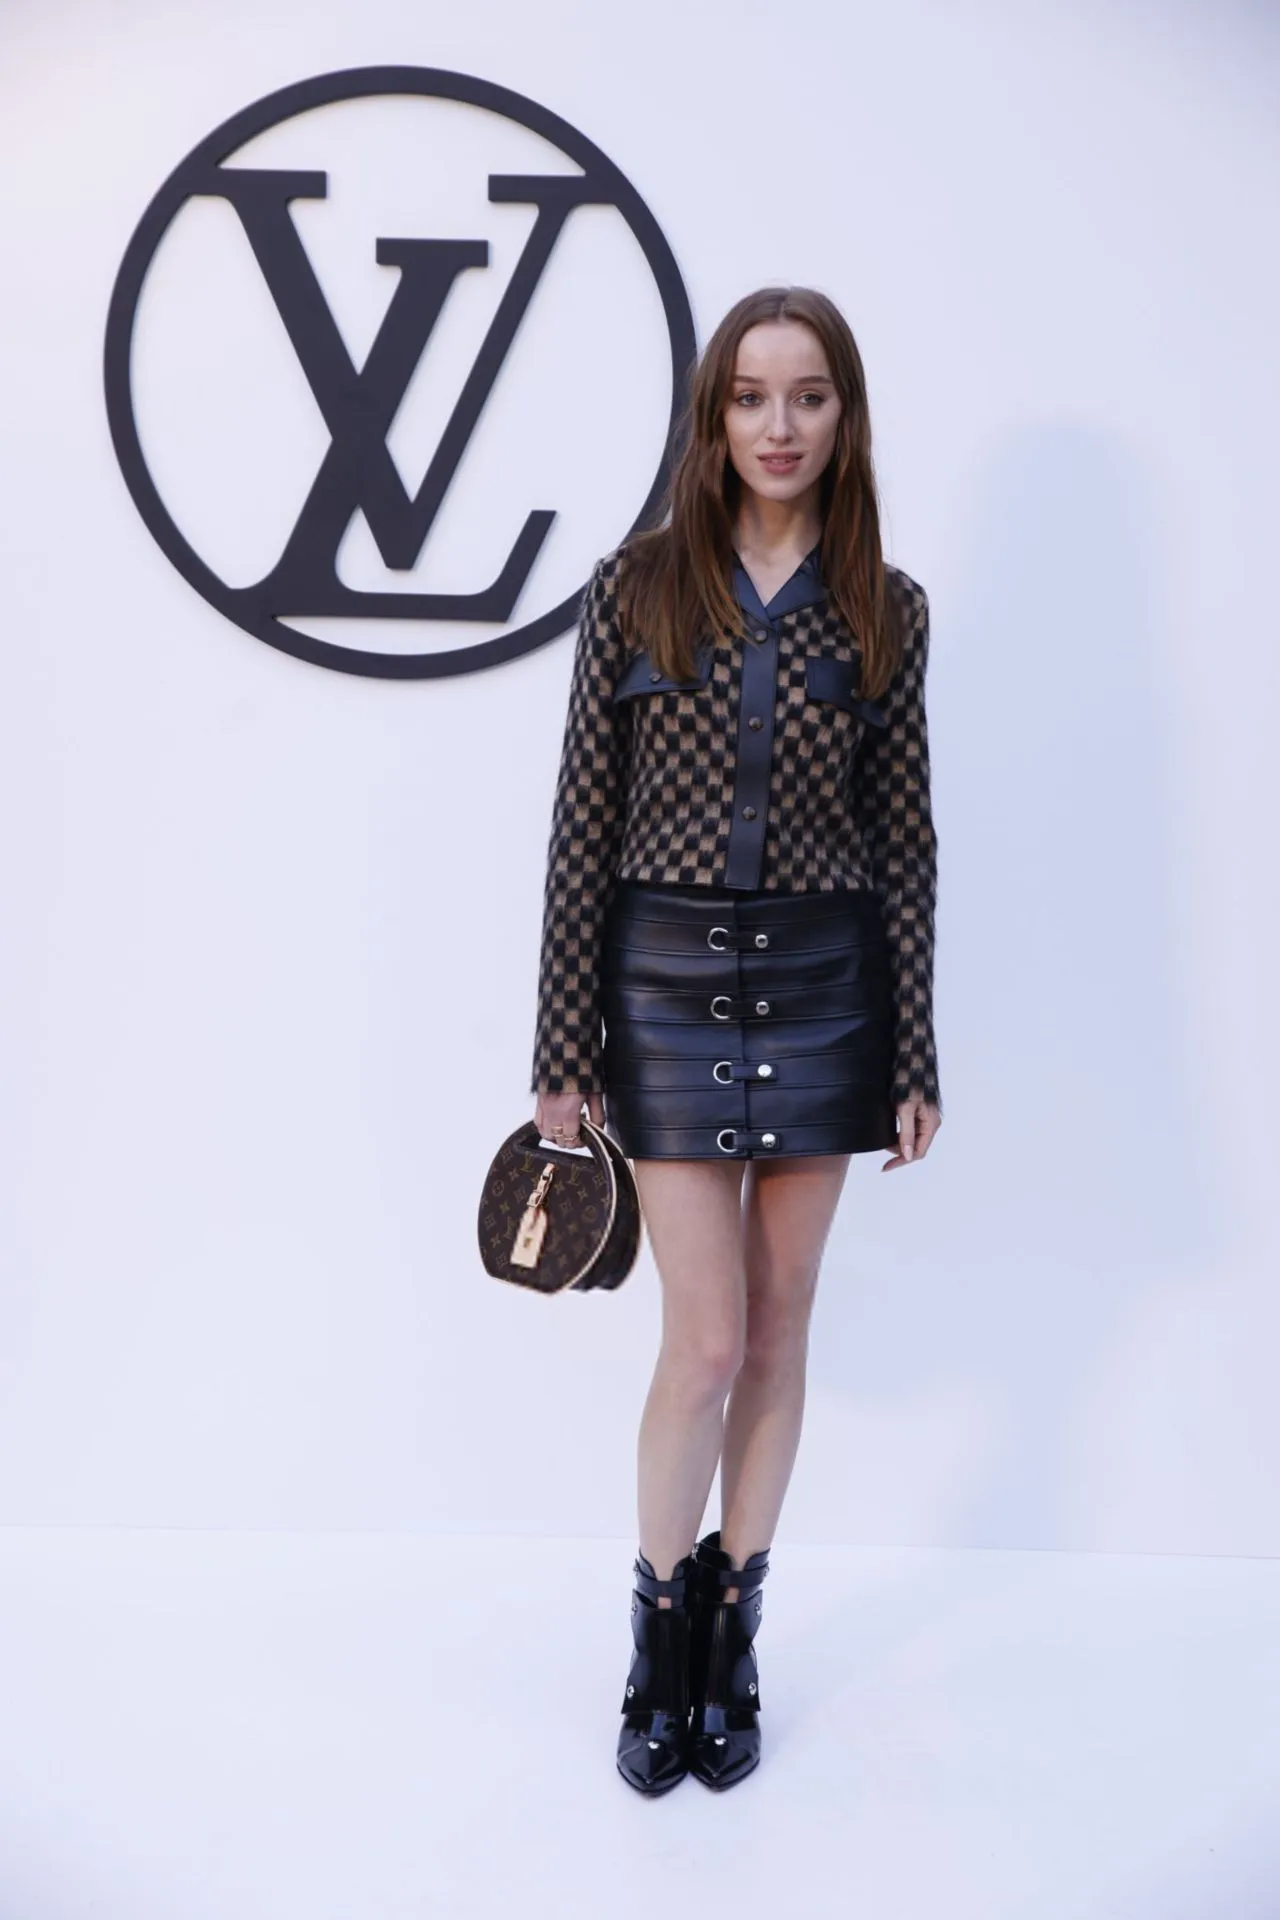 PHOEBE DYNEVOR AT LOUIS VUITTON PHOTOCALL FASHION SHOW IN BARCELONA